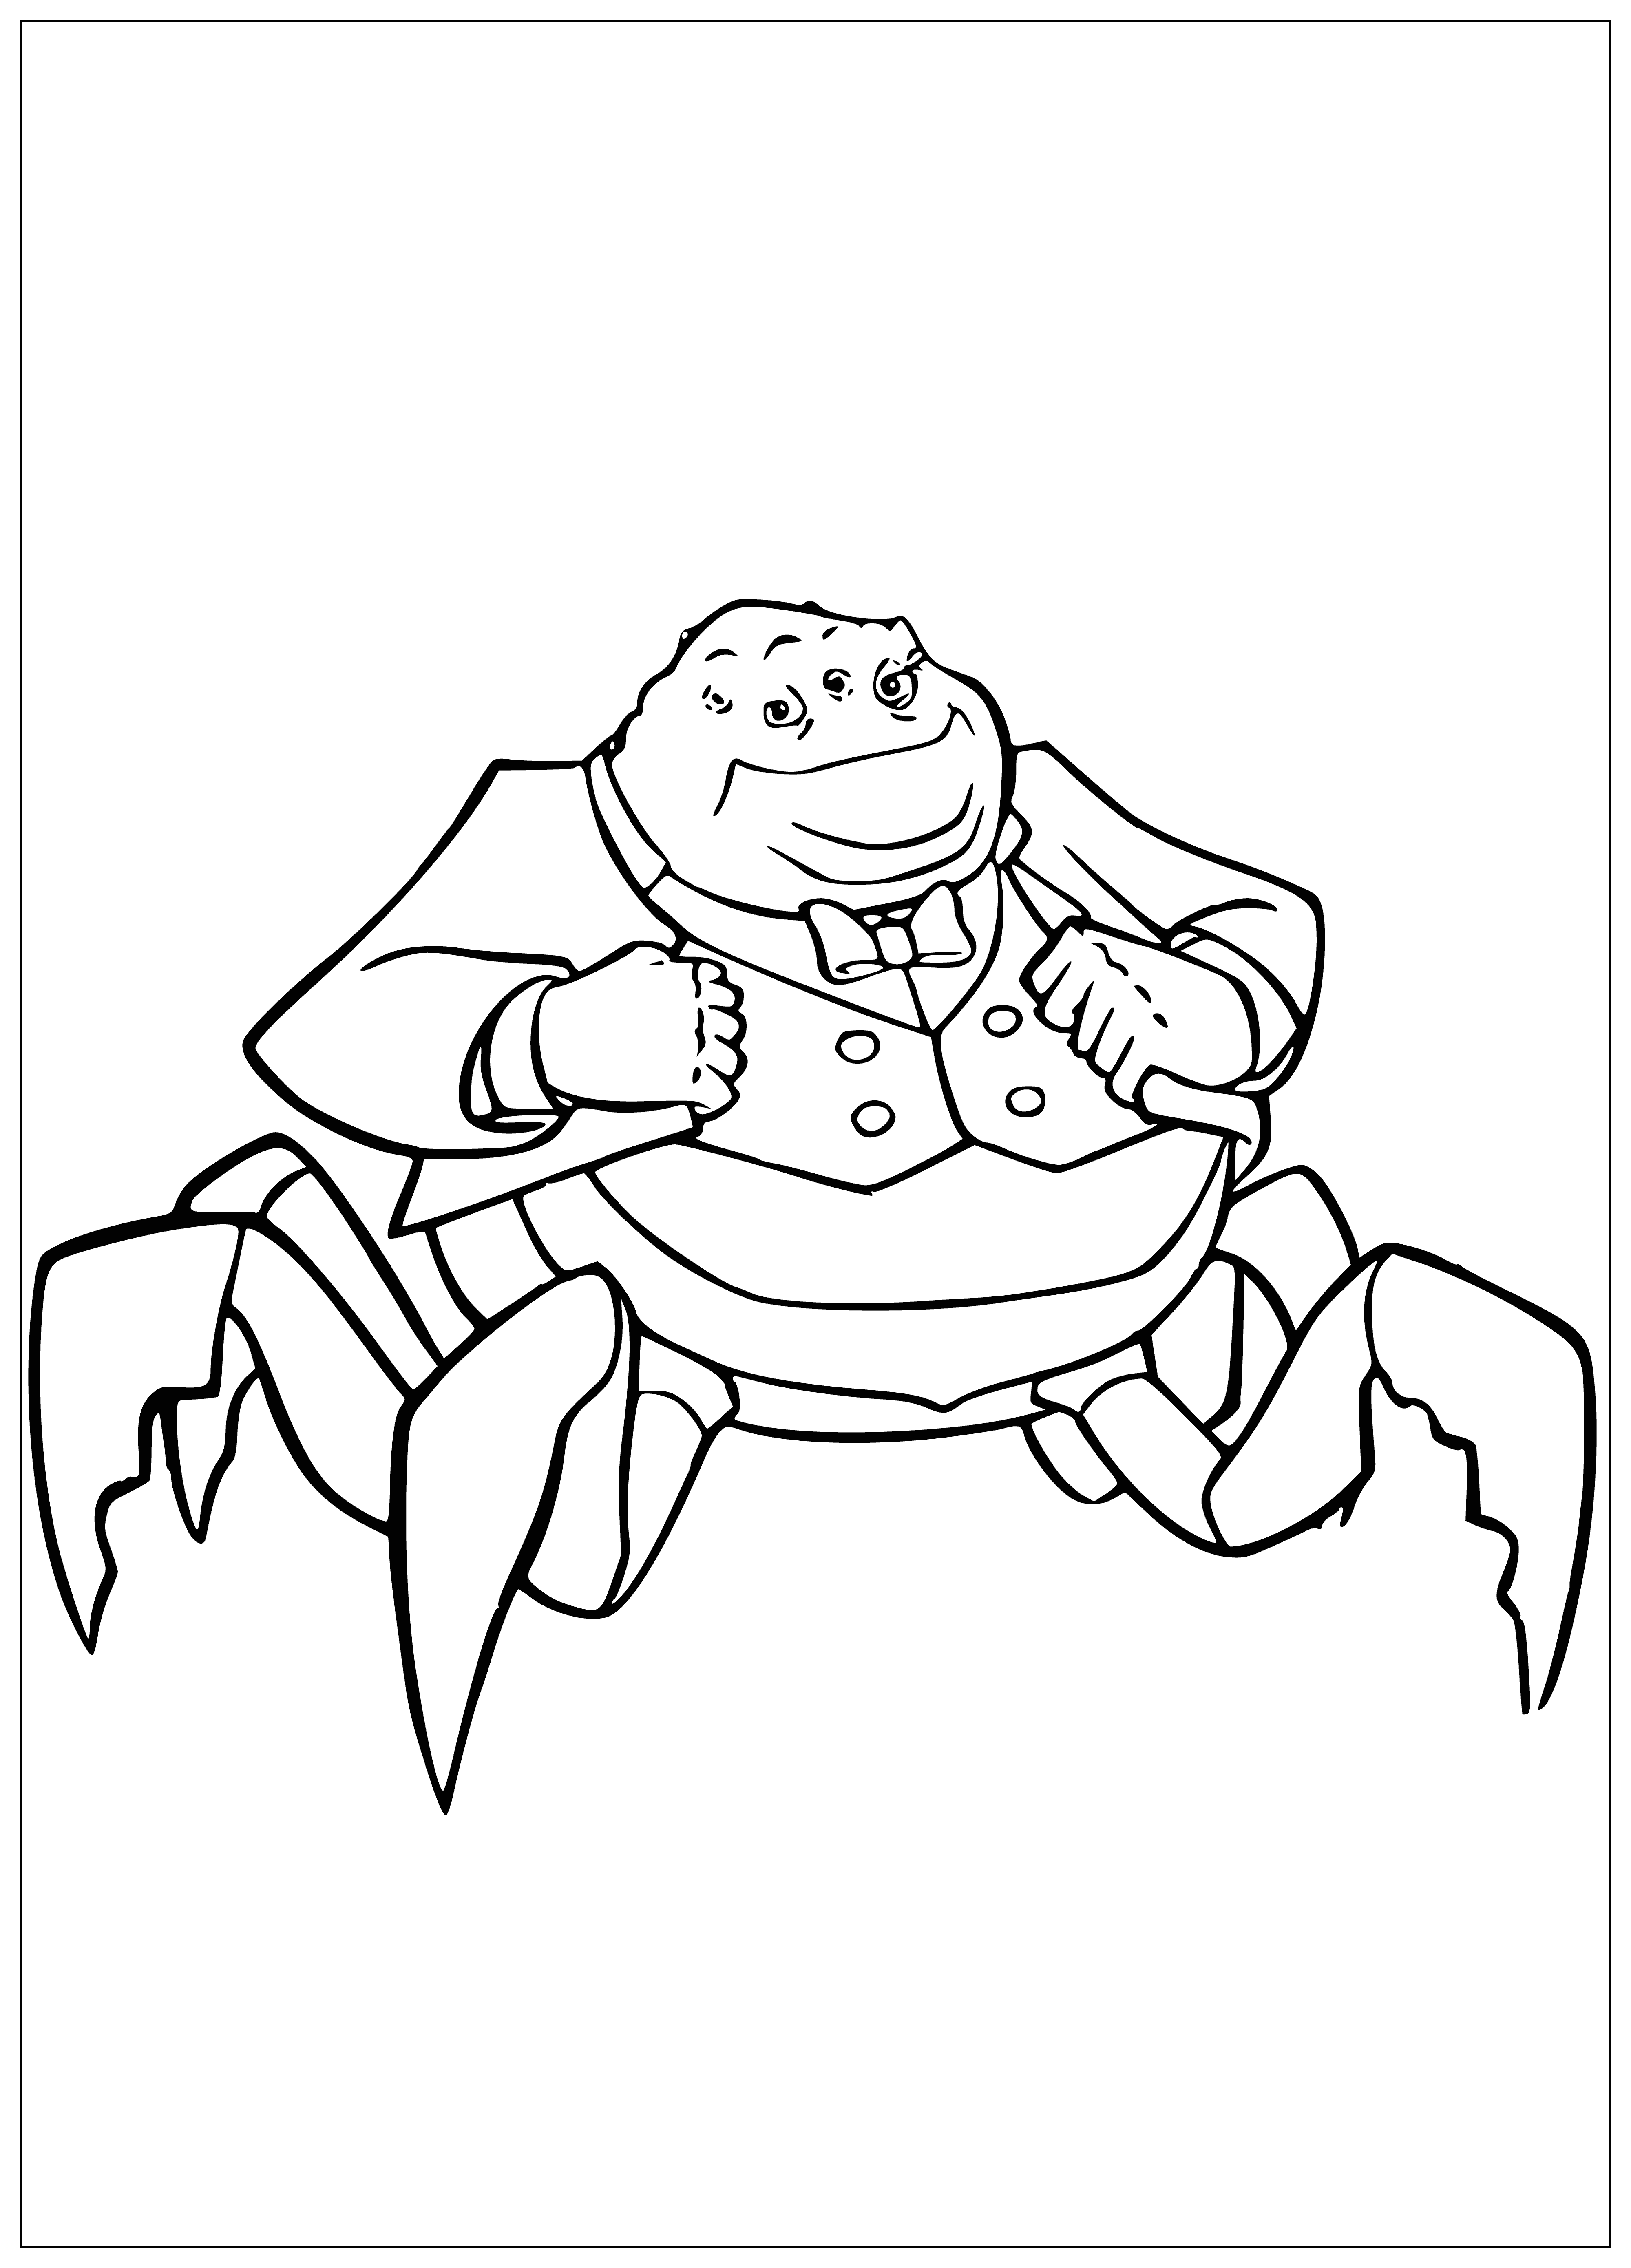 Director of the corporation coloring page